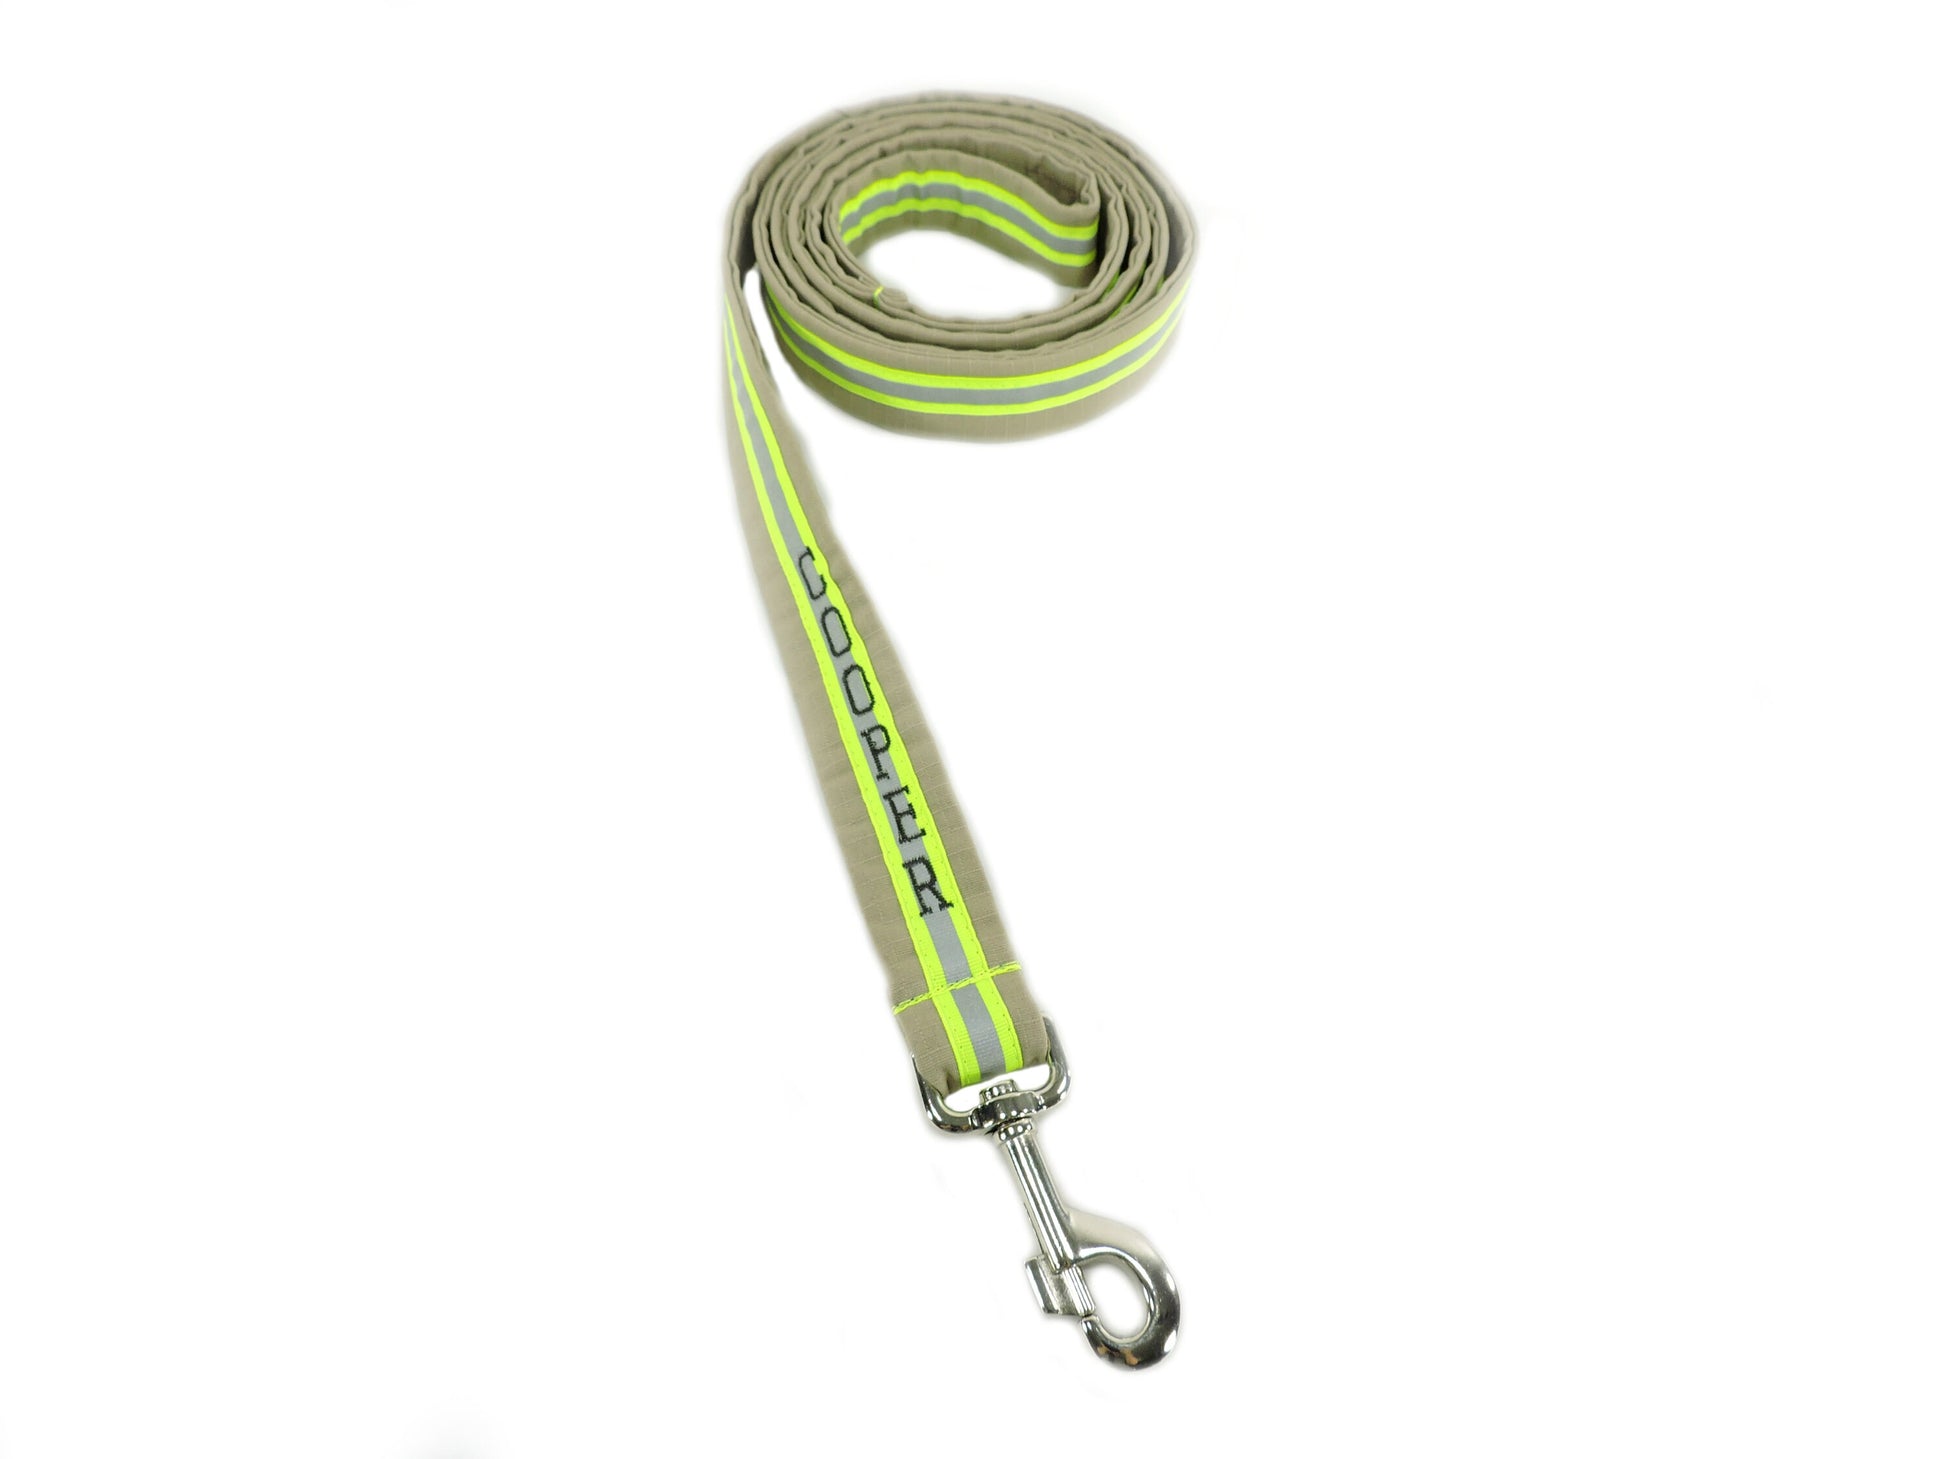 Firefighter Dog Leash with name added